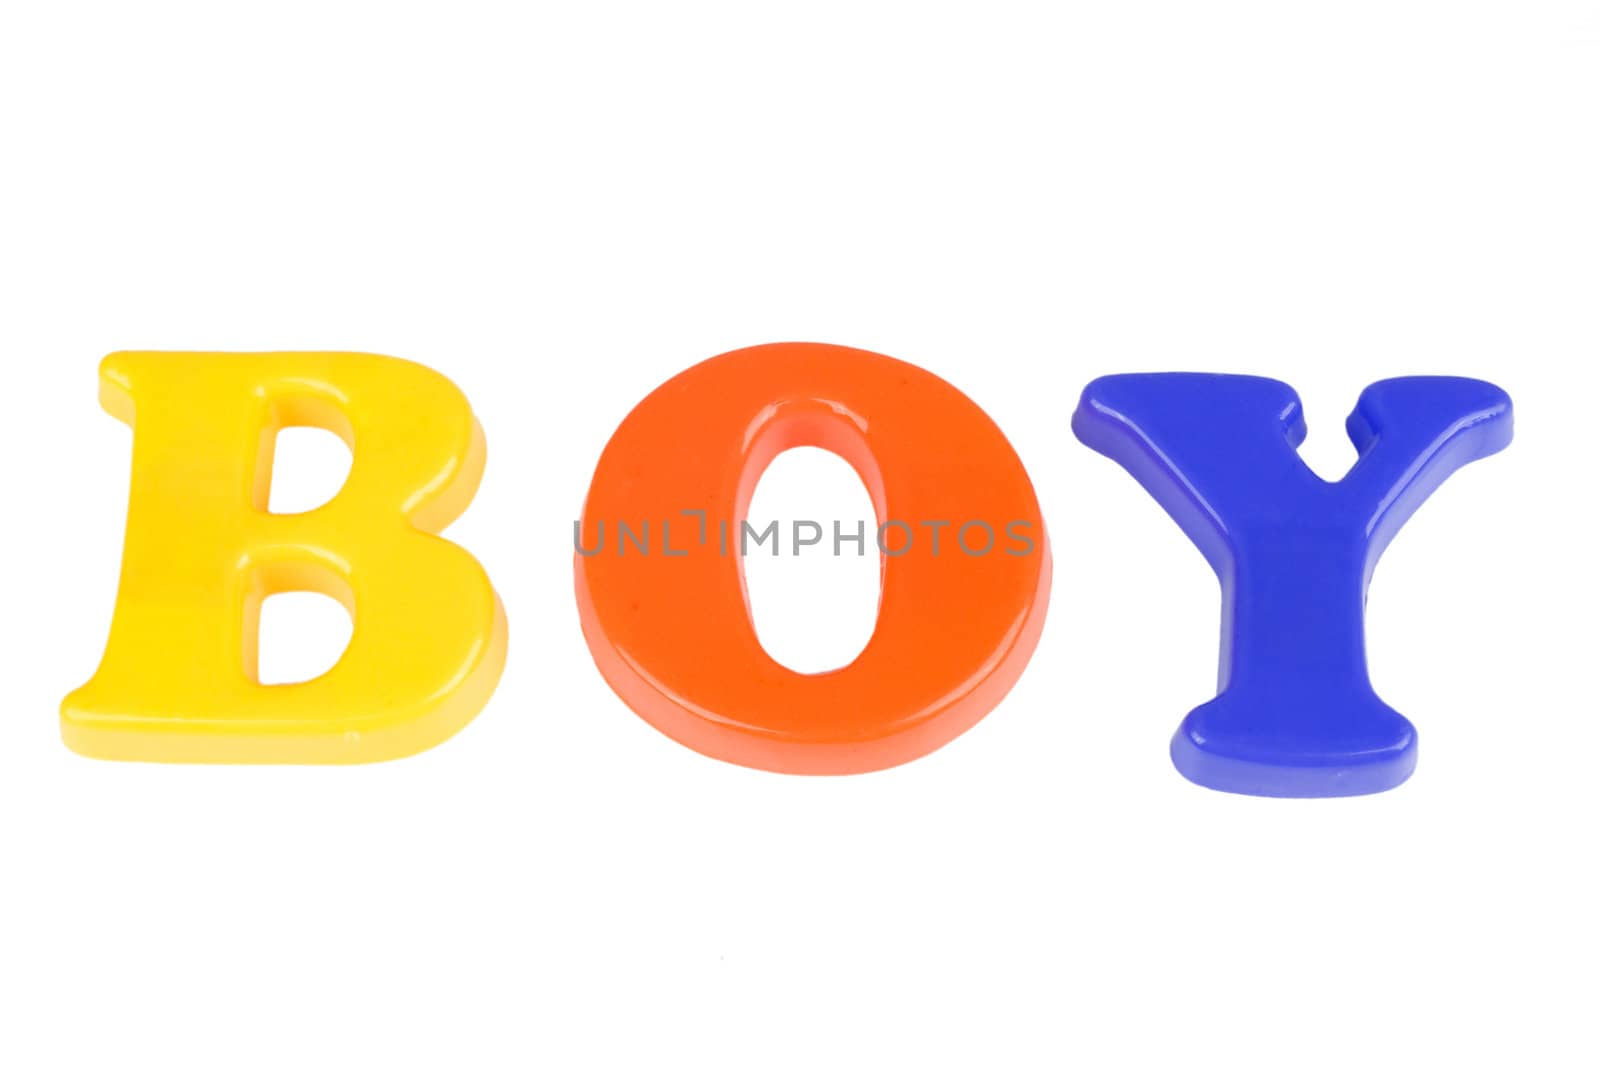 a word "boy" made of colorful letters